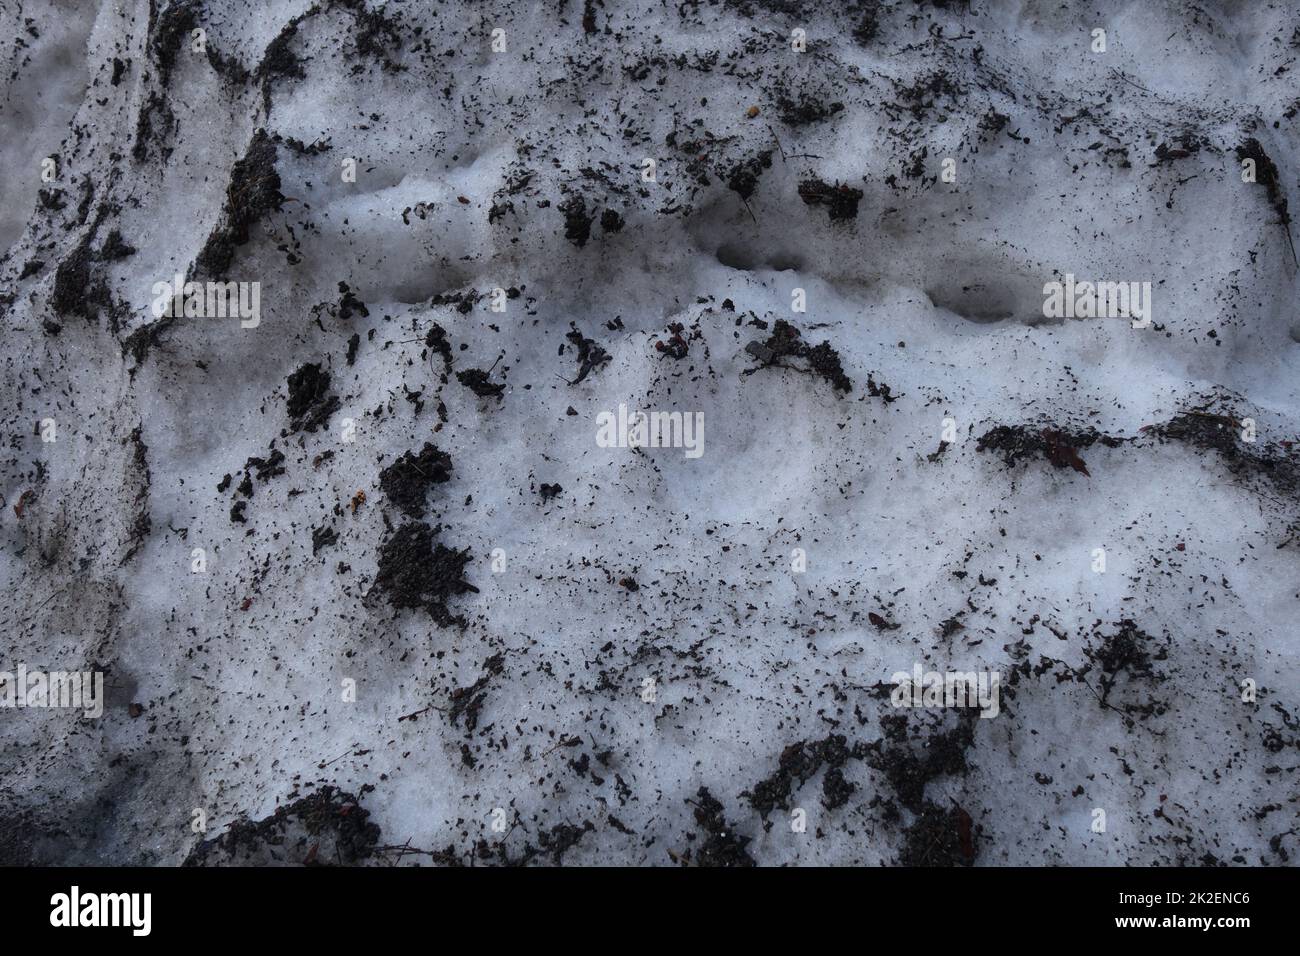 A close up of congested polluted snow Stock Photo